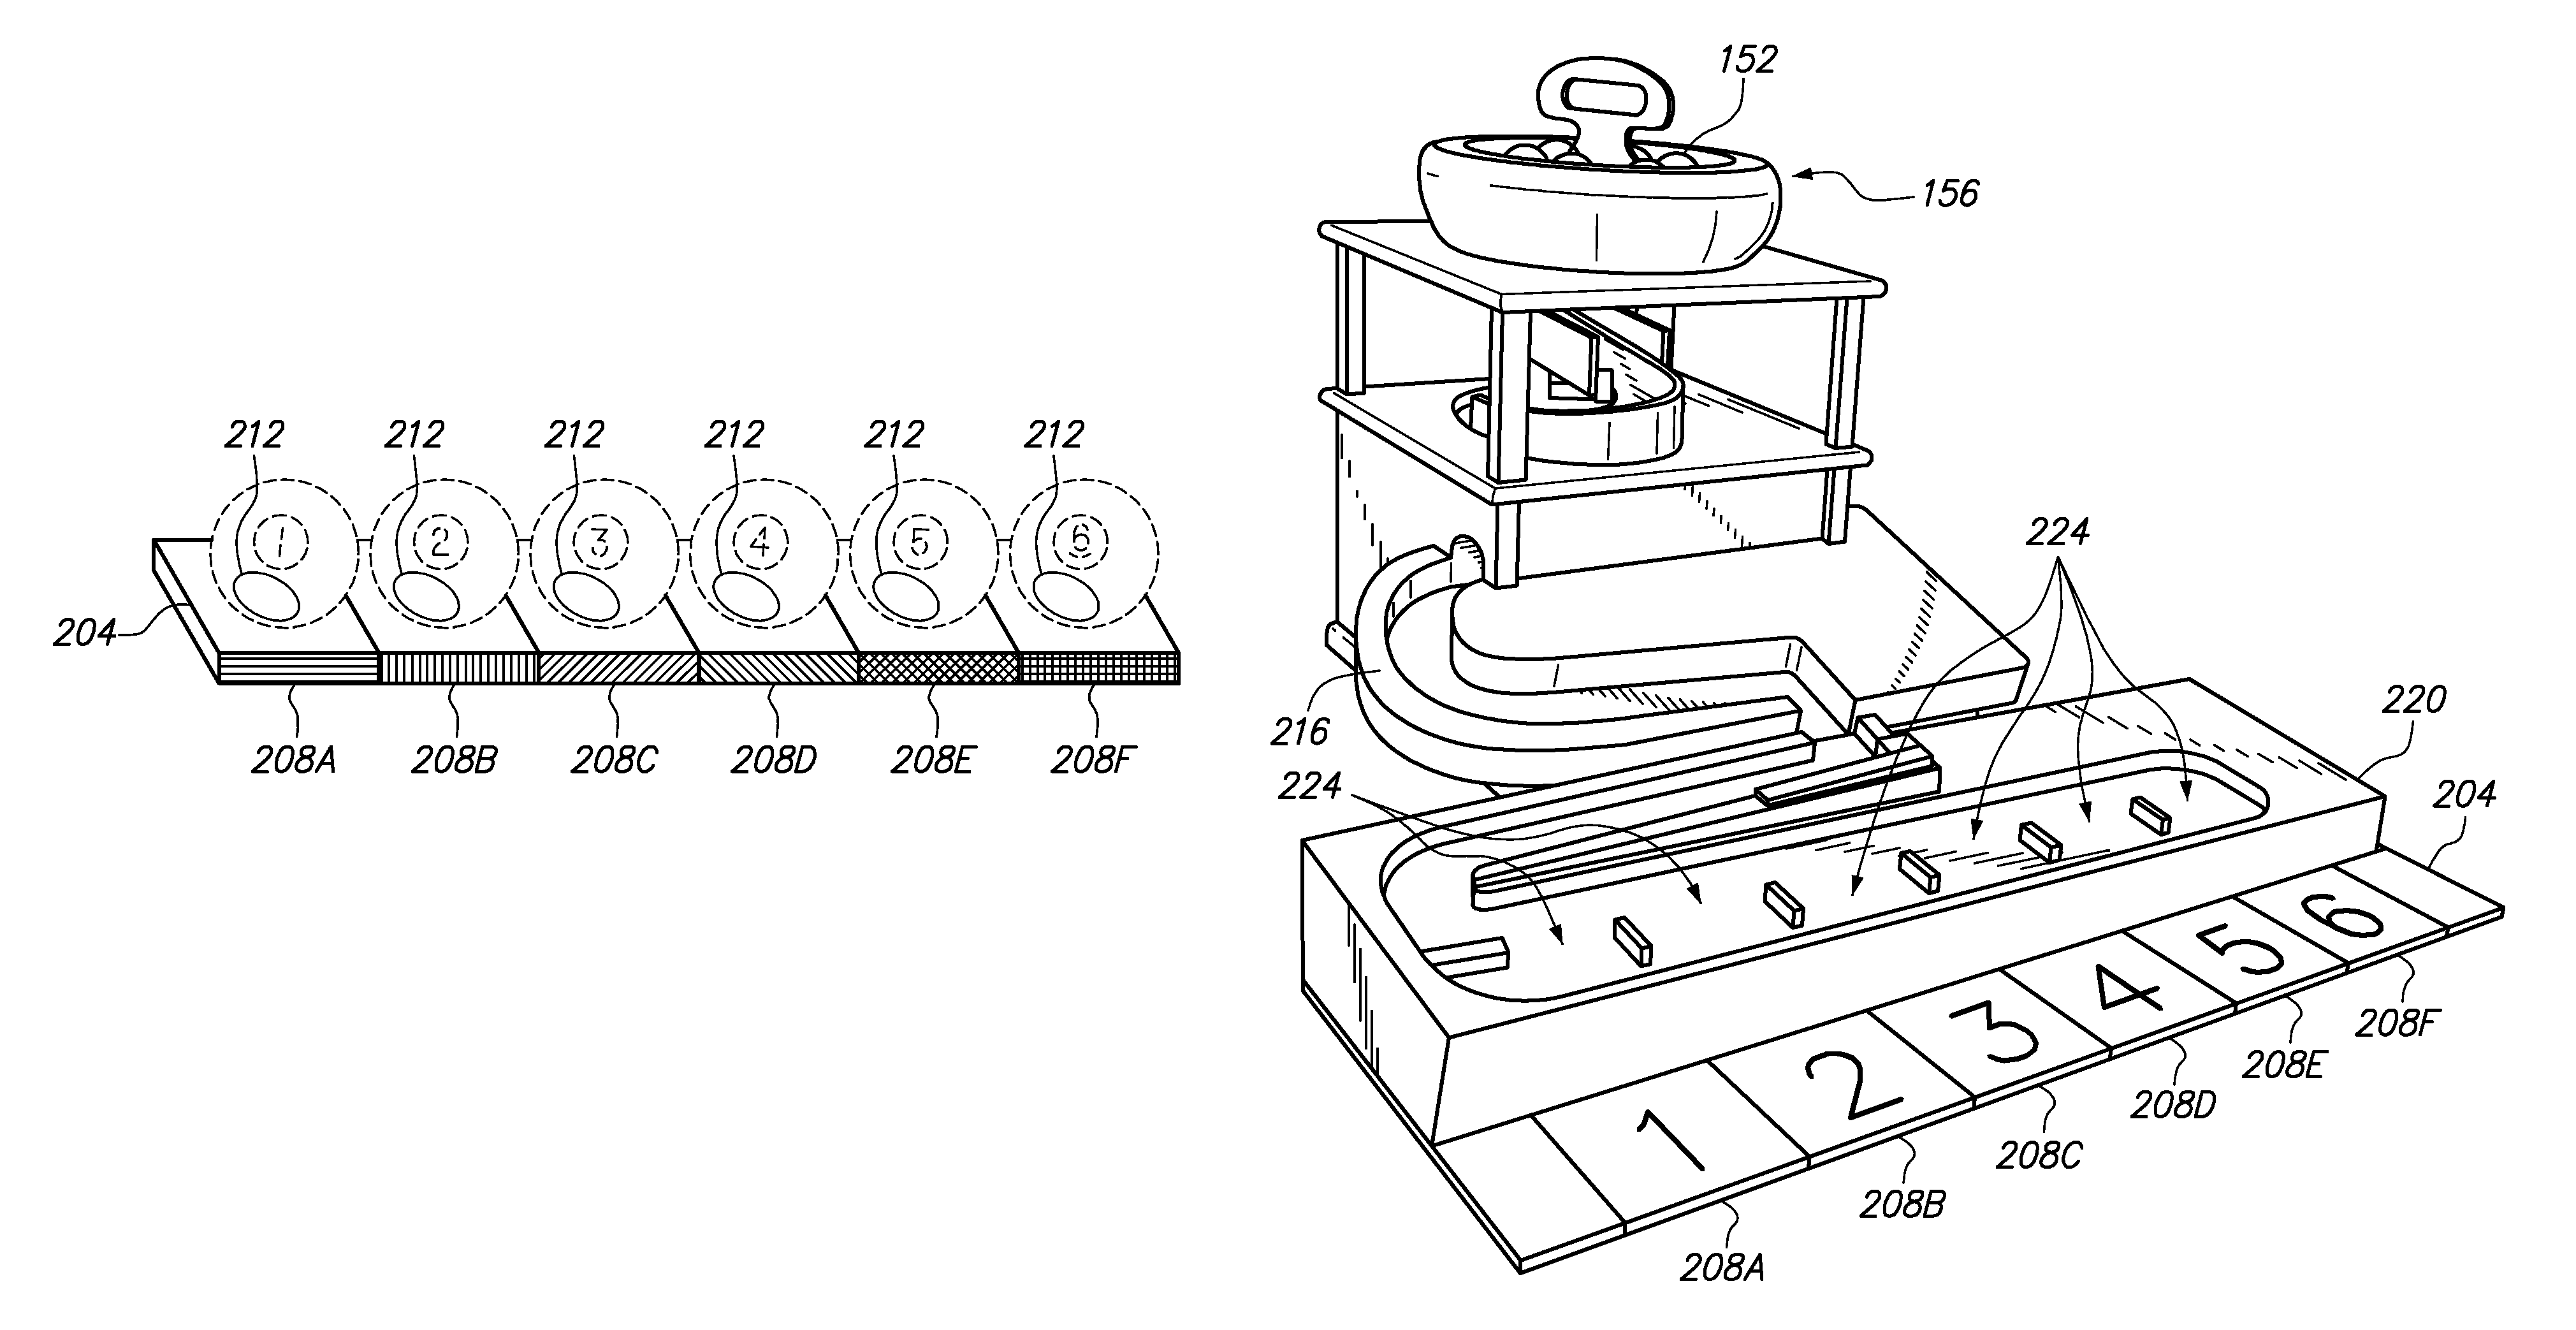 Billiard ball mixing device and wagering game